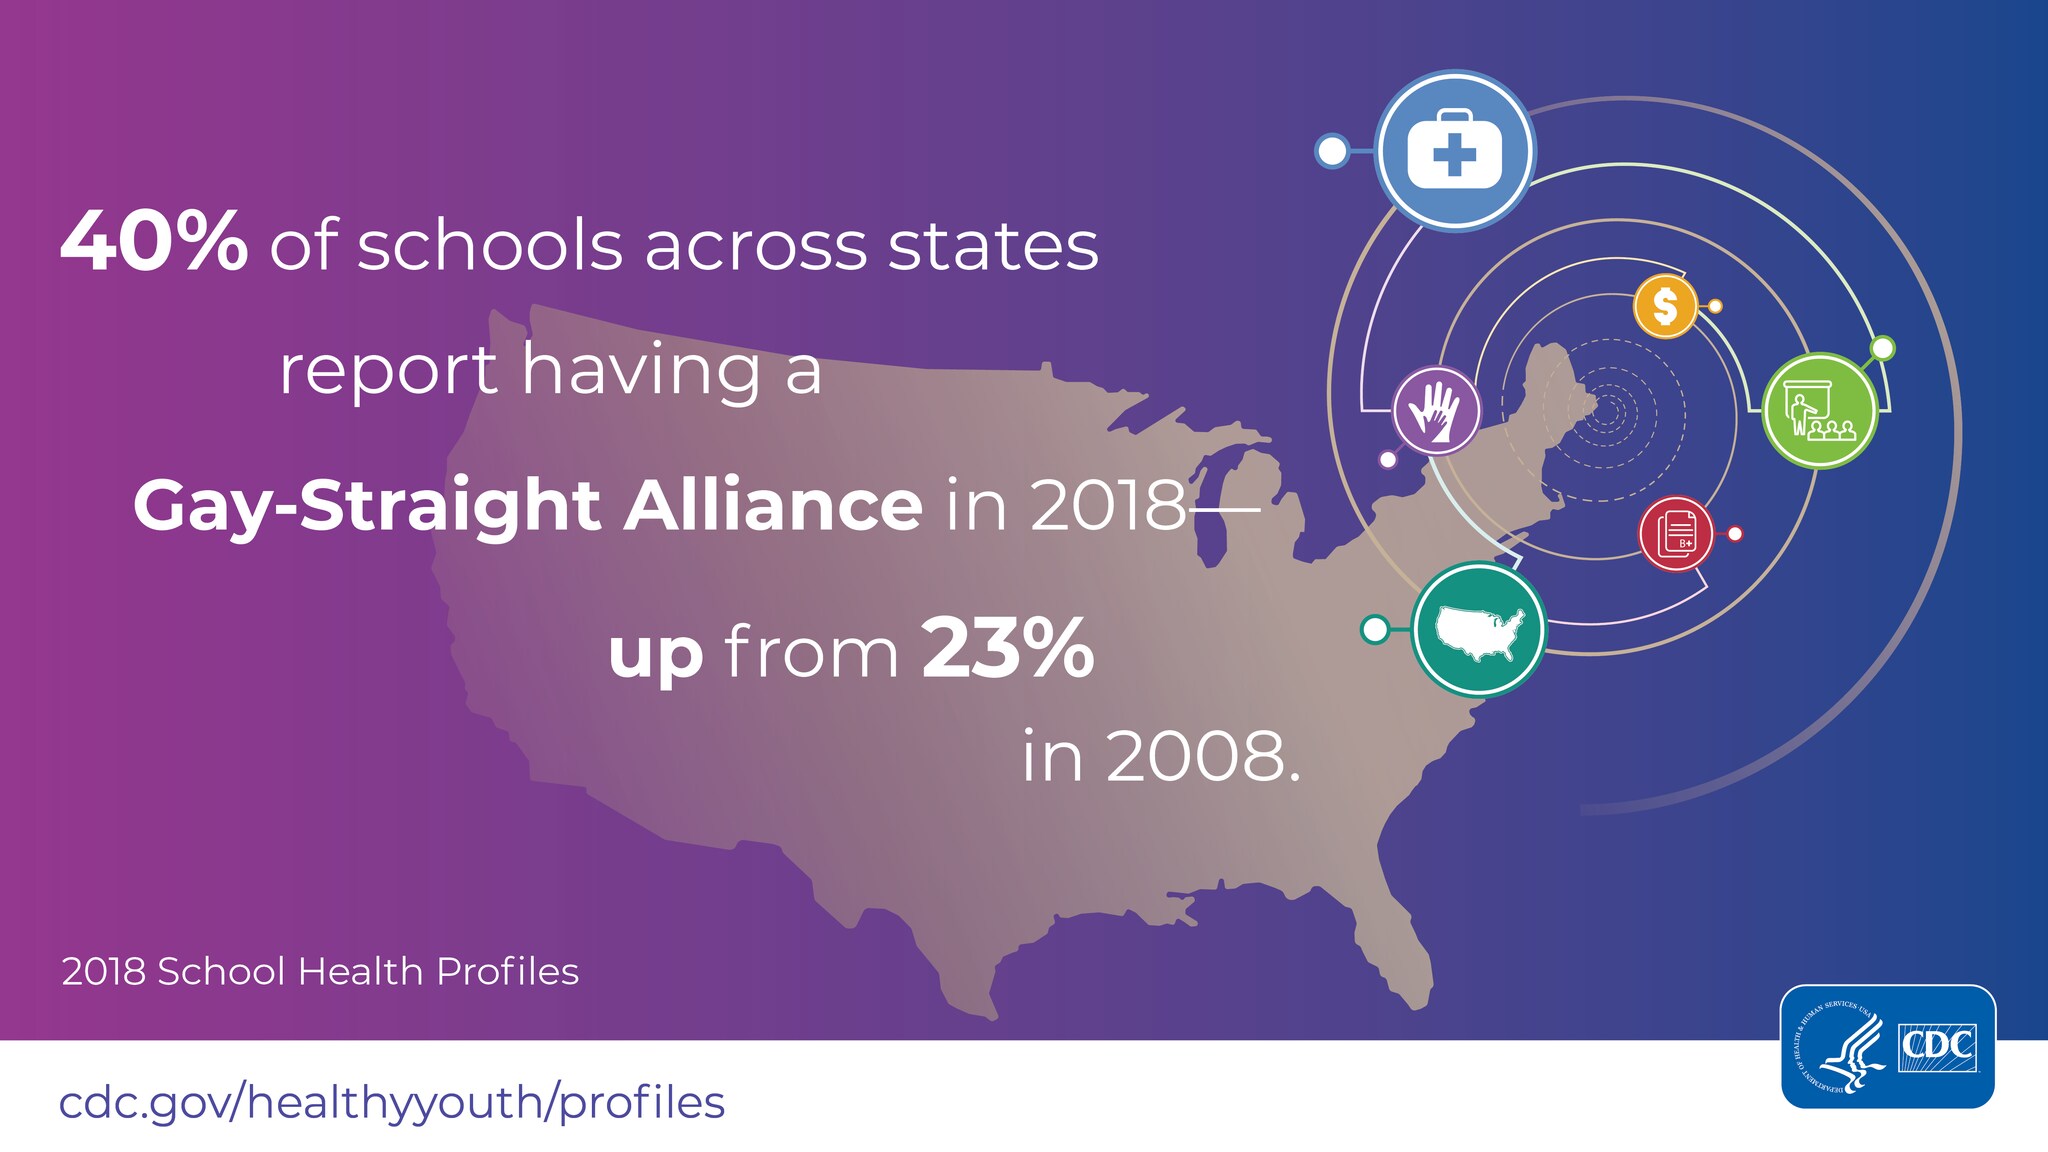 2018 School Health Profiles Infographic 7: 40% of school across states reports having a Gay-Straight Alliance in 2018 up from 23% in 2008